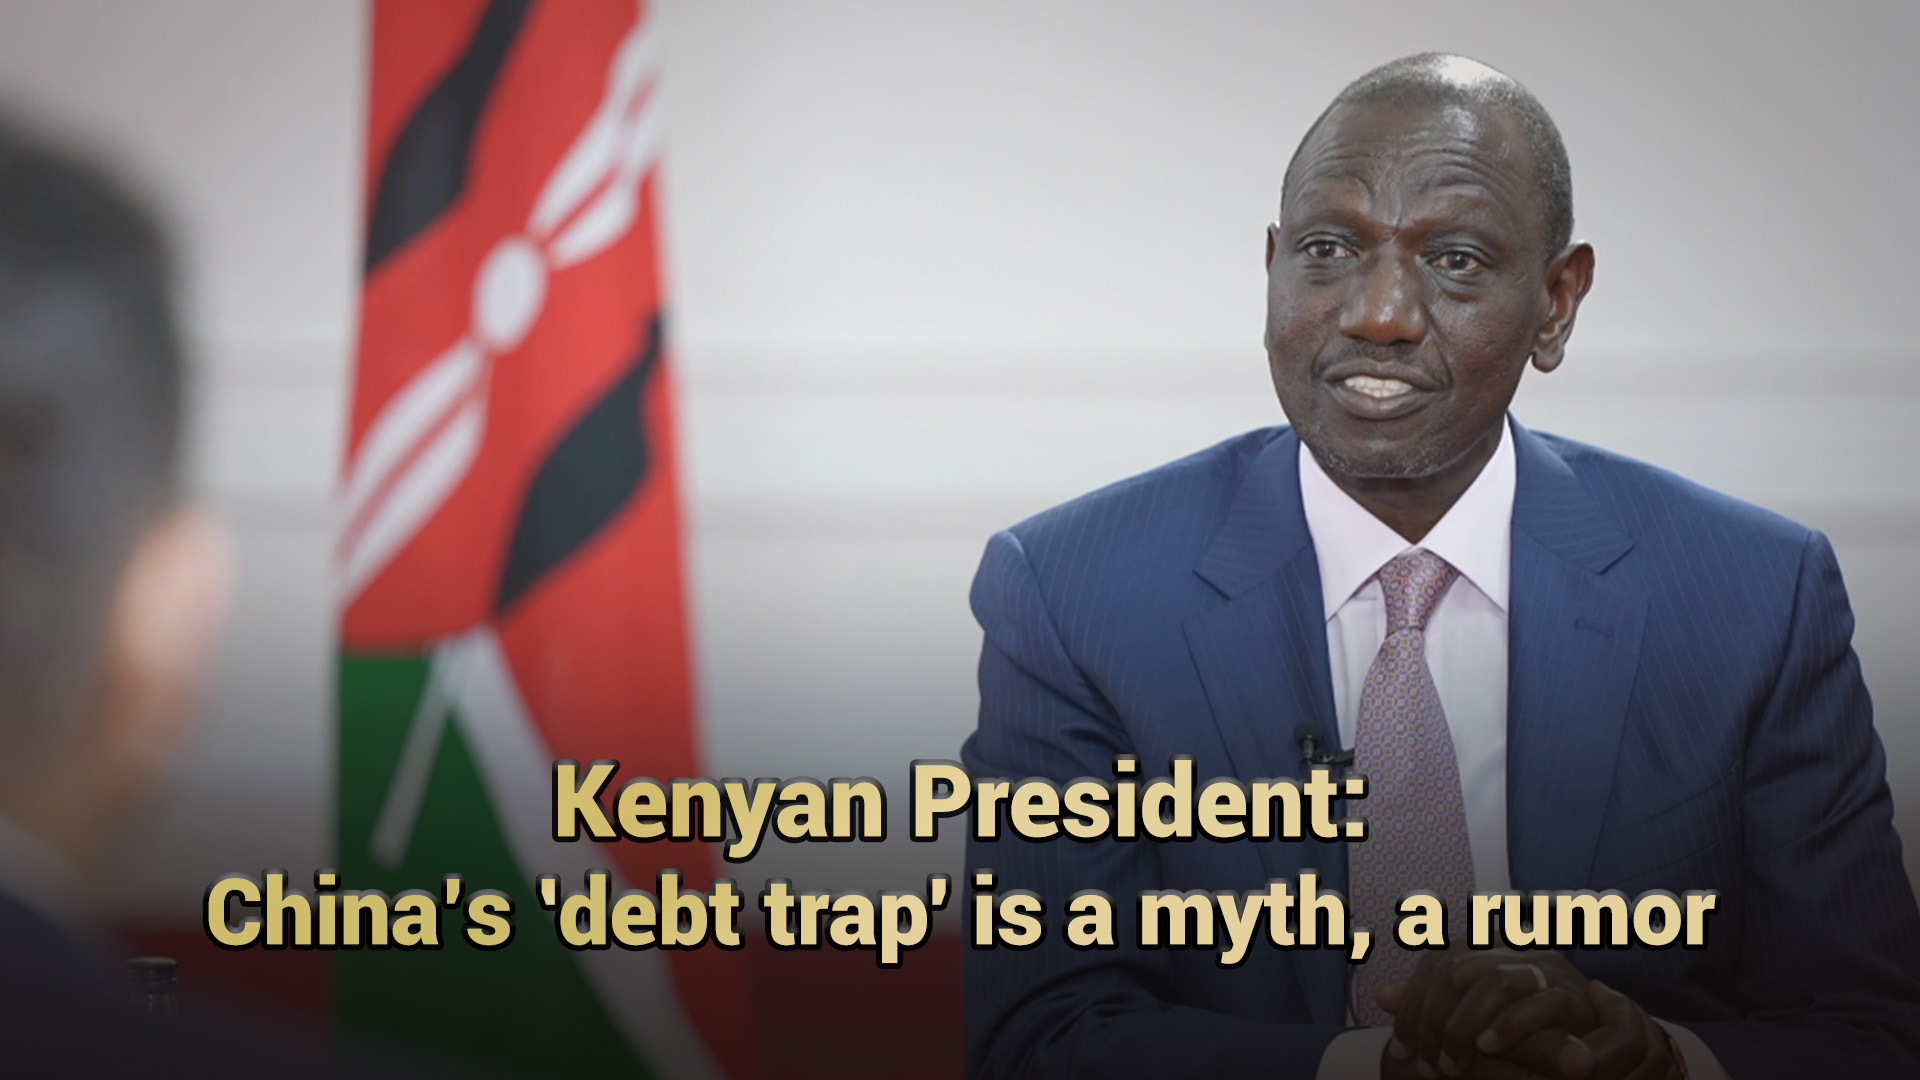 President William Ruto Addresses Concerns of Chinese Debt Trap